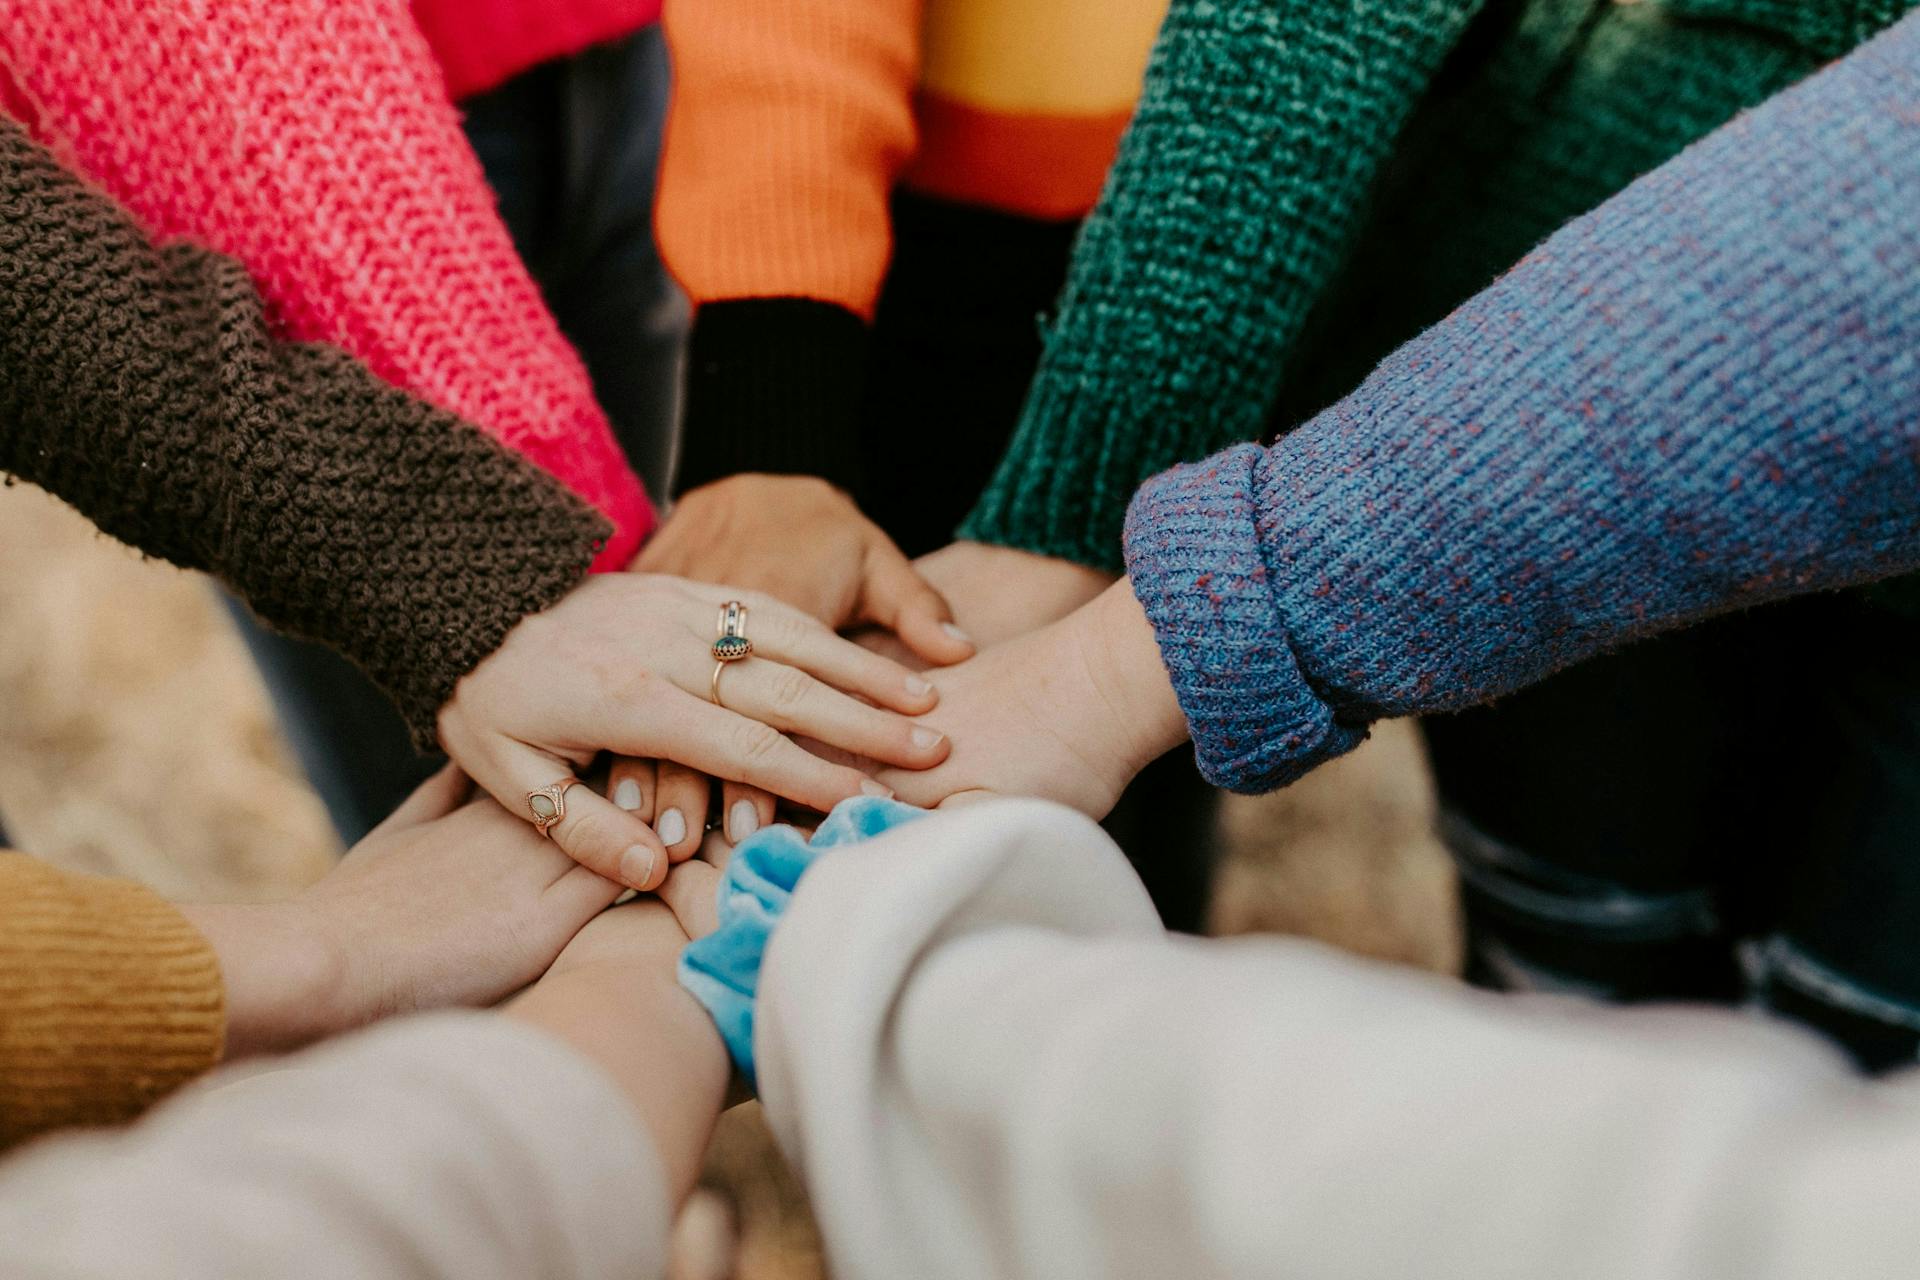 Group of diverse people extending hands to each other in a small circle. Connecting with others who have same interests is a key selling point of niche social media sites.